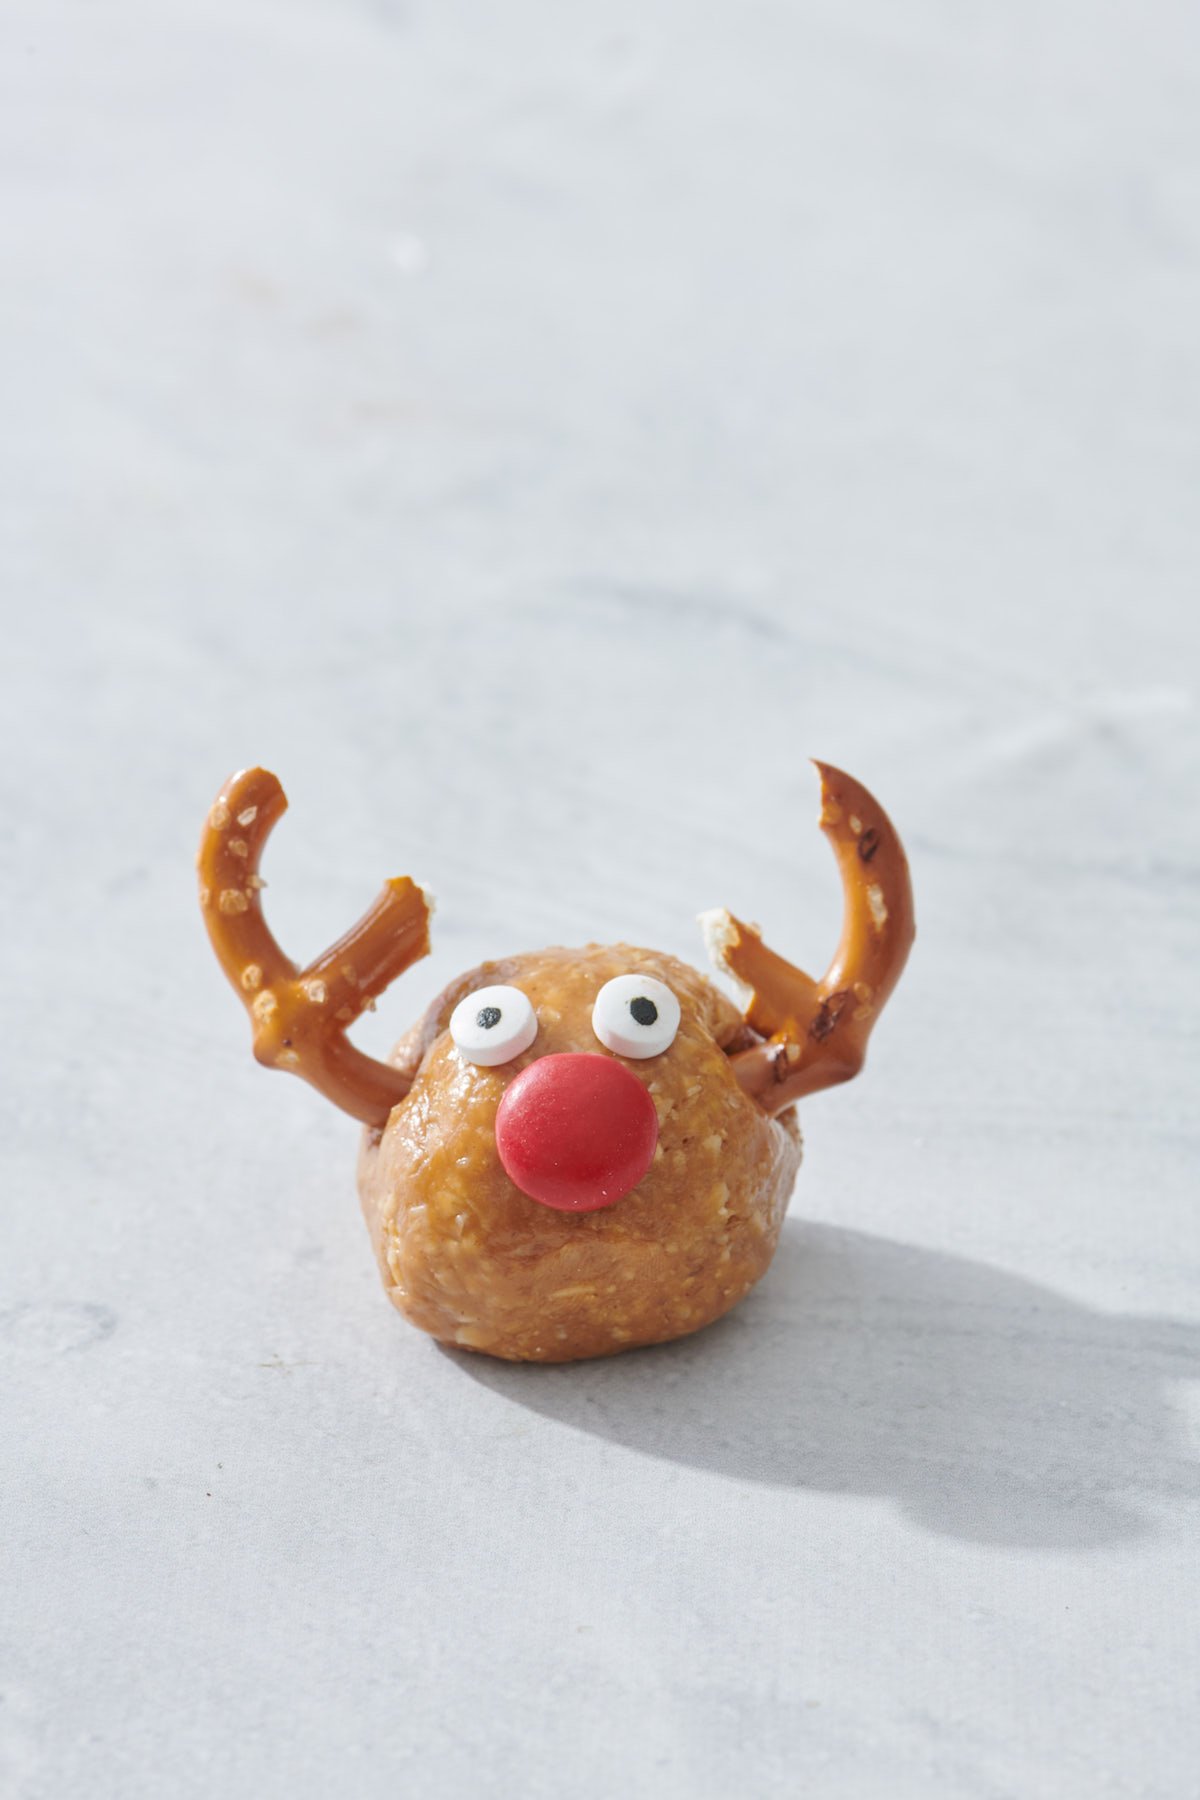 peanut butter oatmeal ball with pretzel antlers, red candy nose and candy eyes to form No-Bake Reindeer Bite